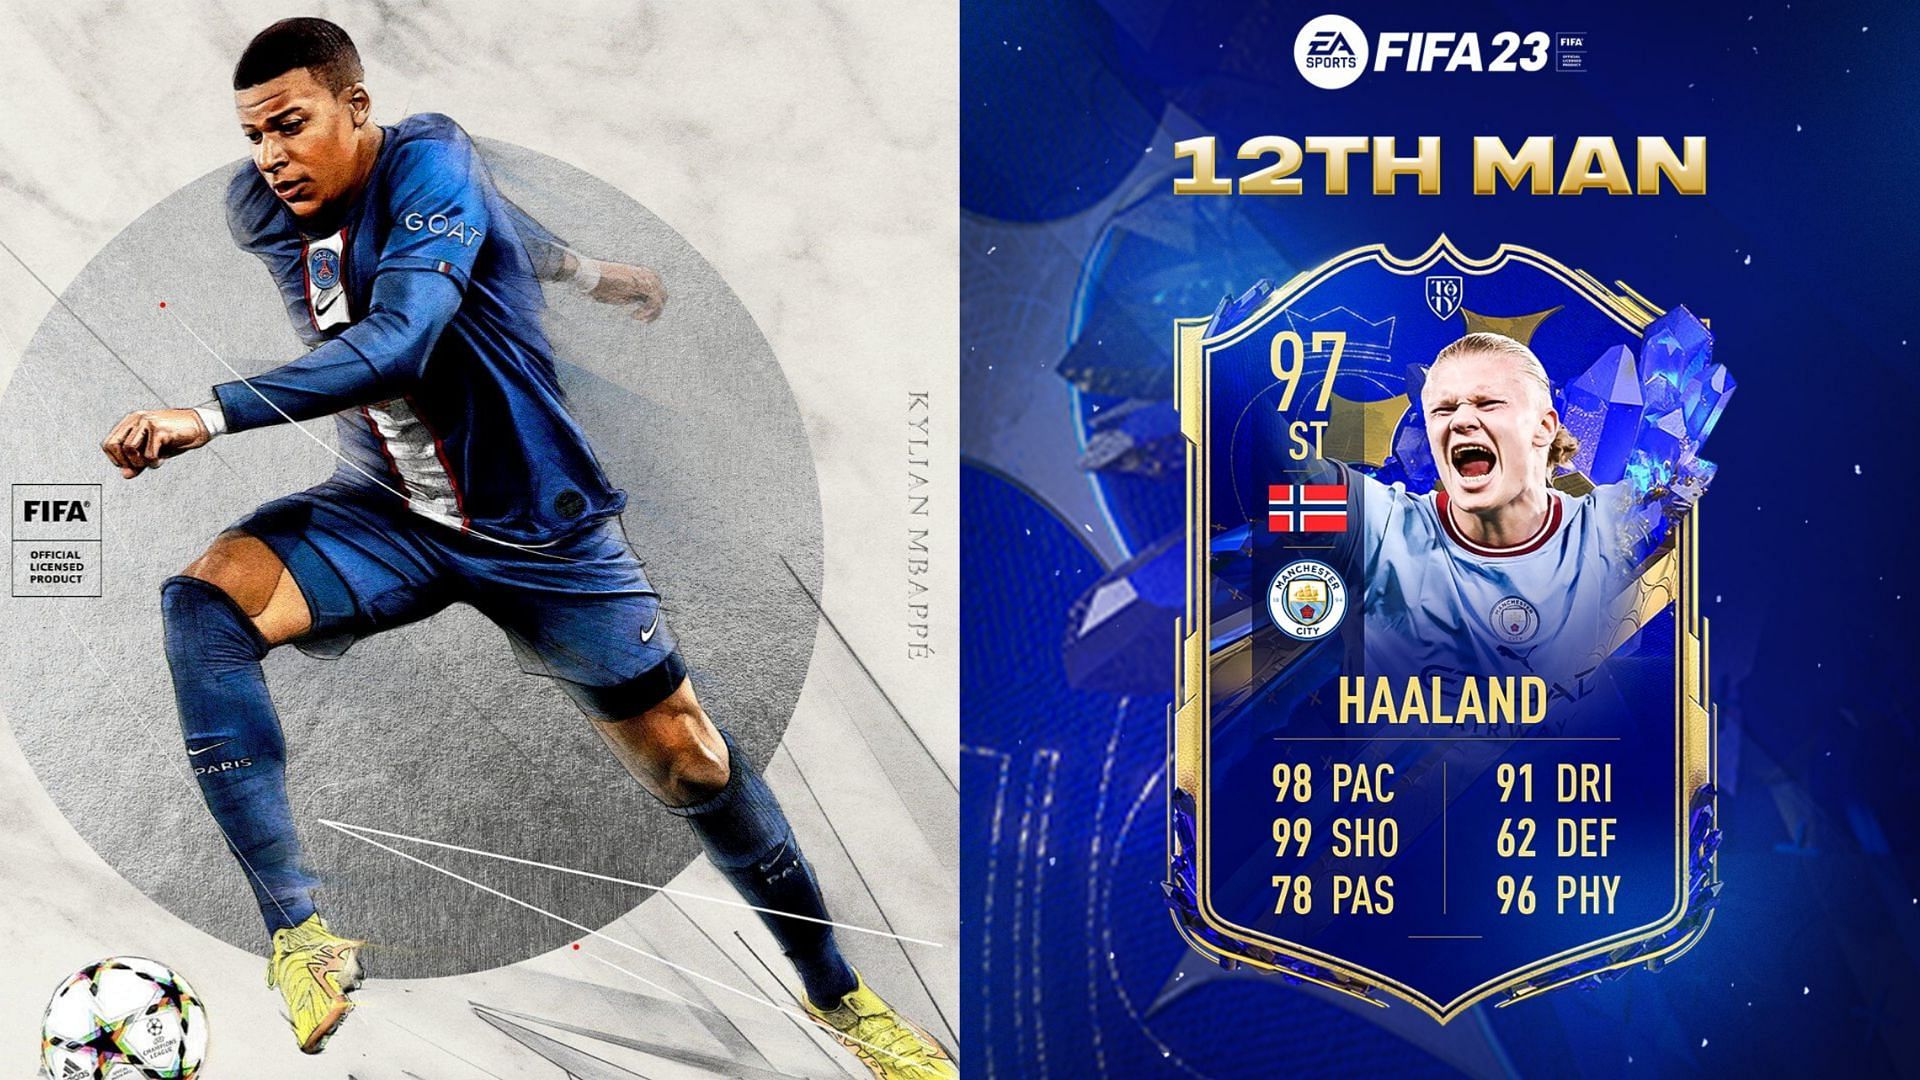 Haaland is rumored to have been selected as the 12th man (Images via EA Sports, Twitter/FUT Sheriff)